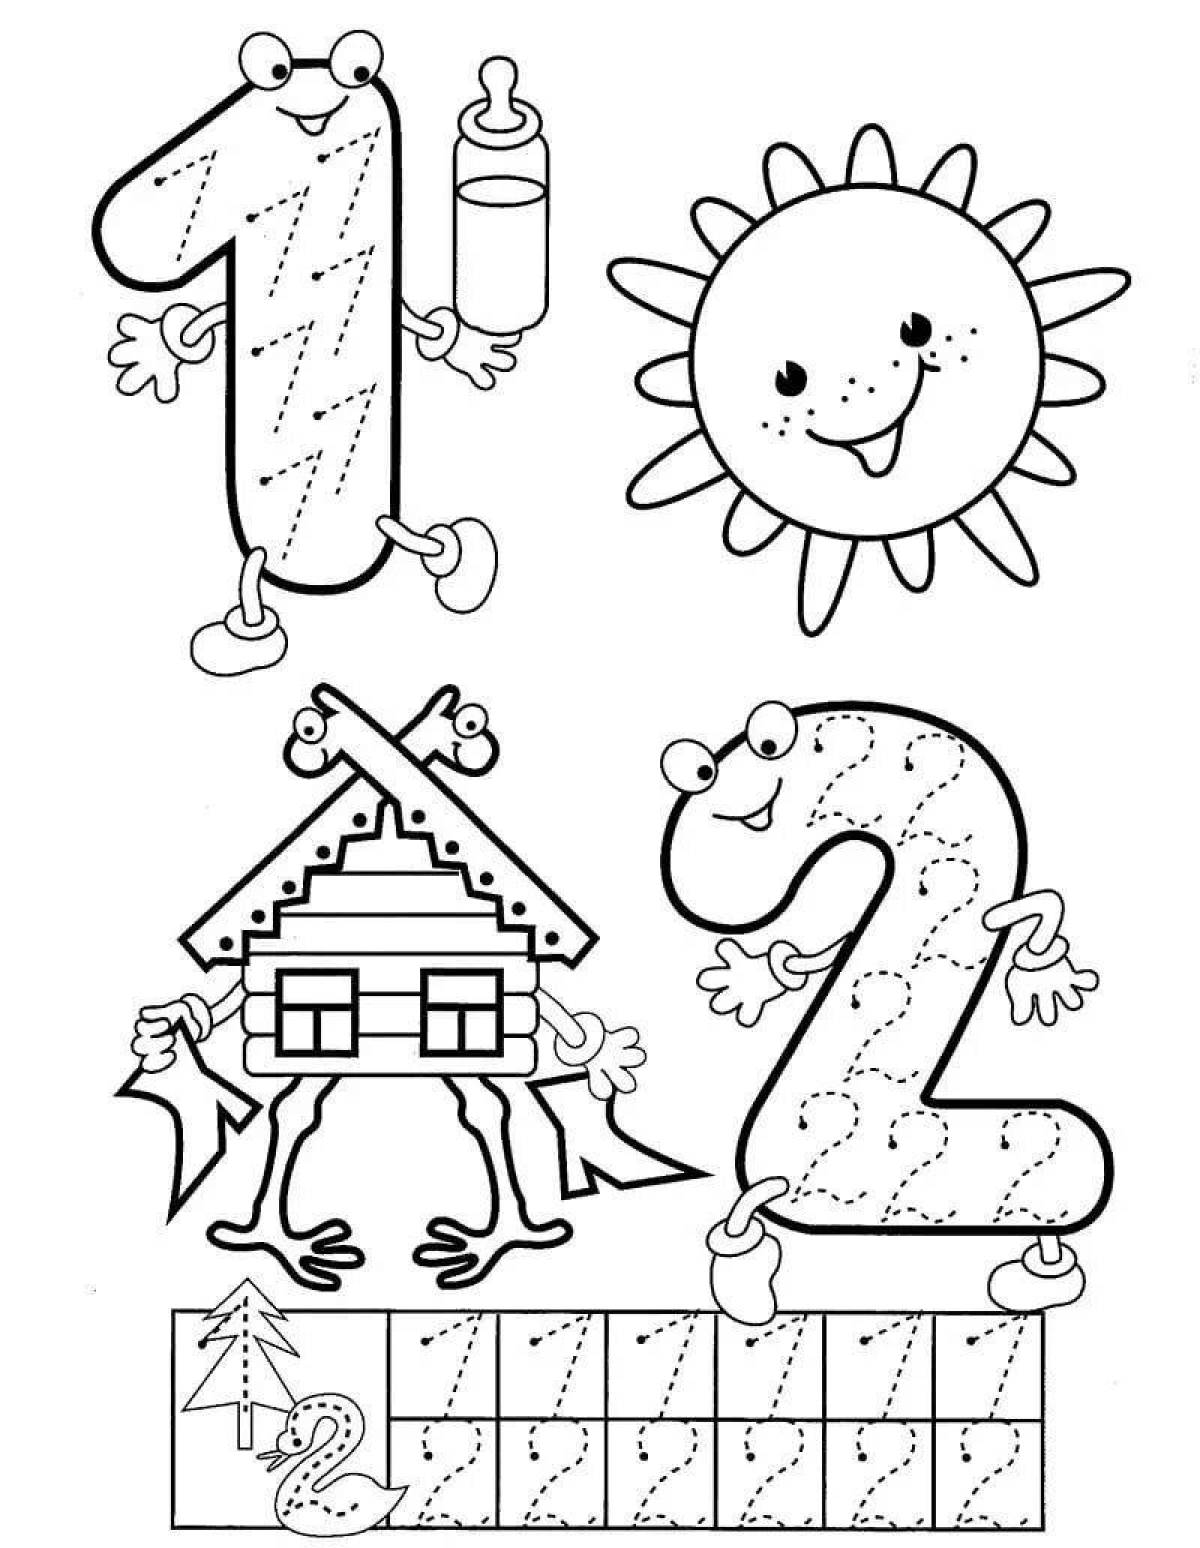 Creative letter and number coloring book for preschoolers